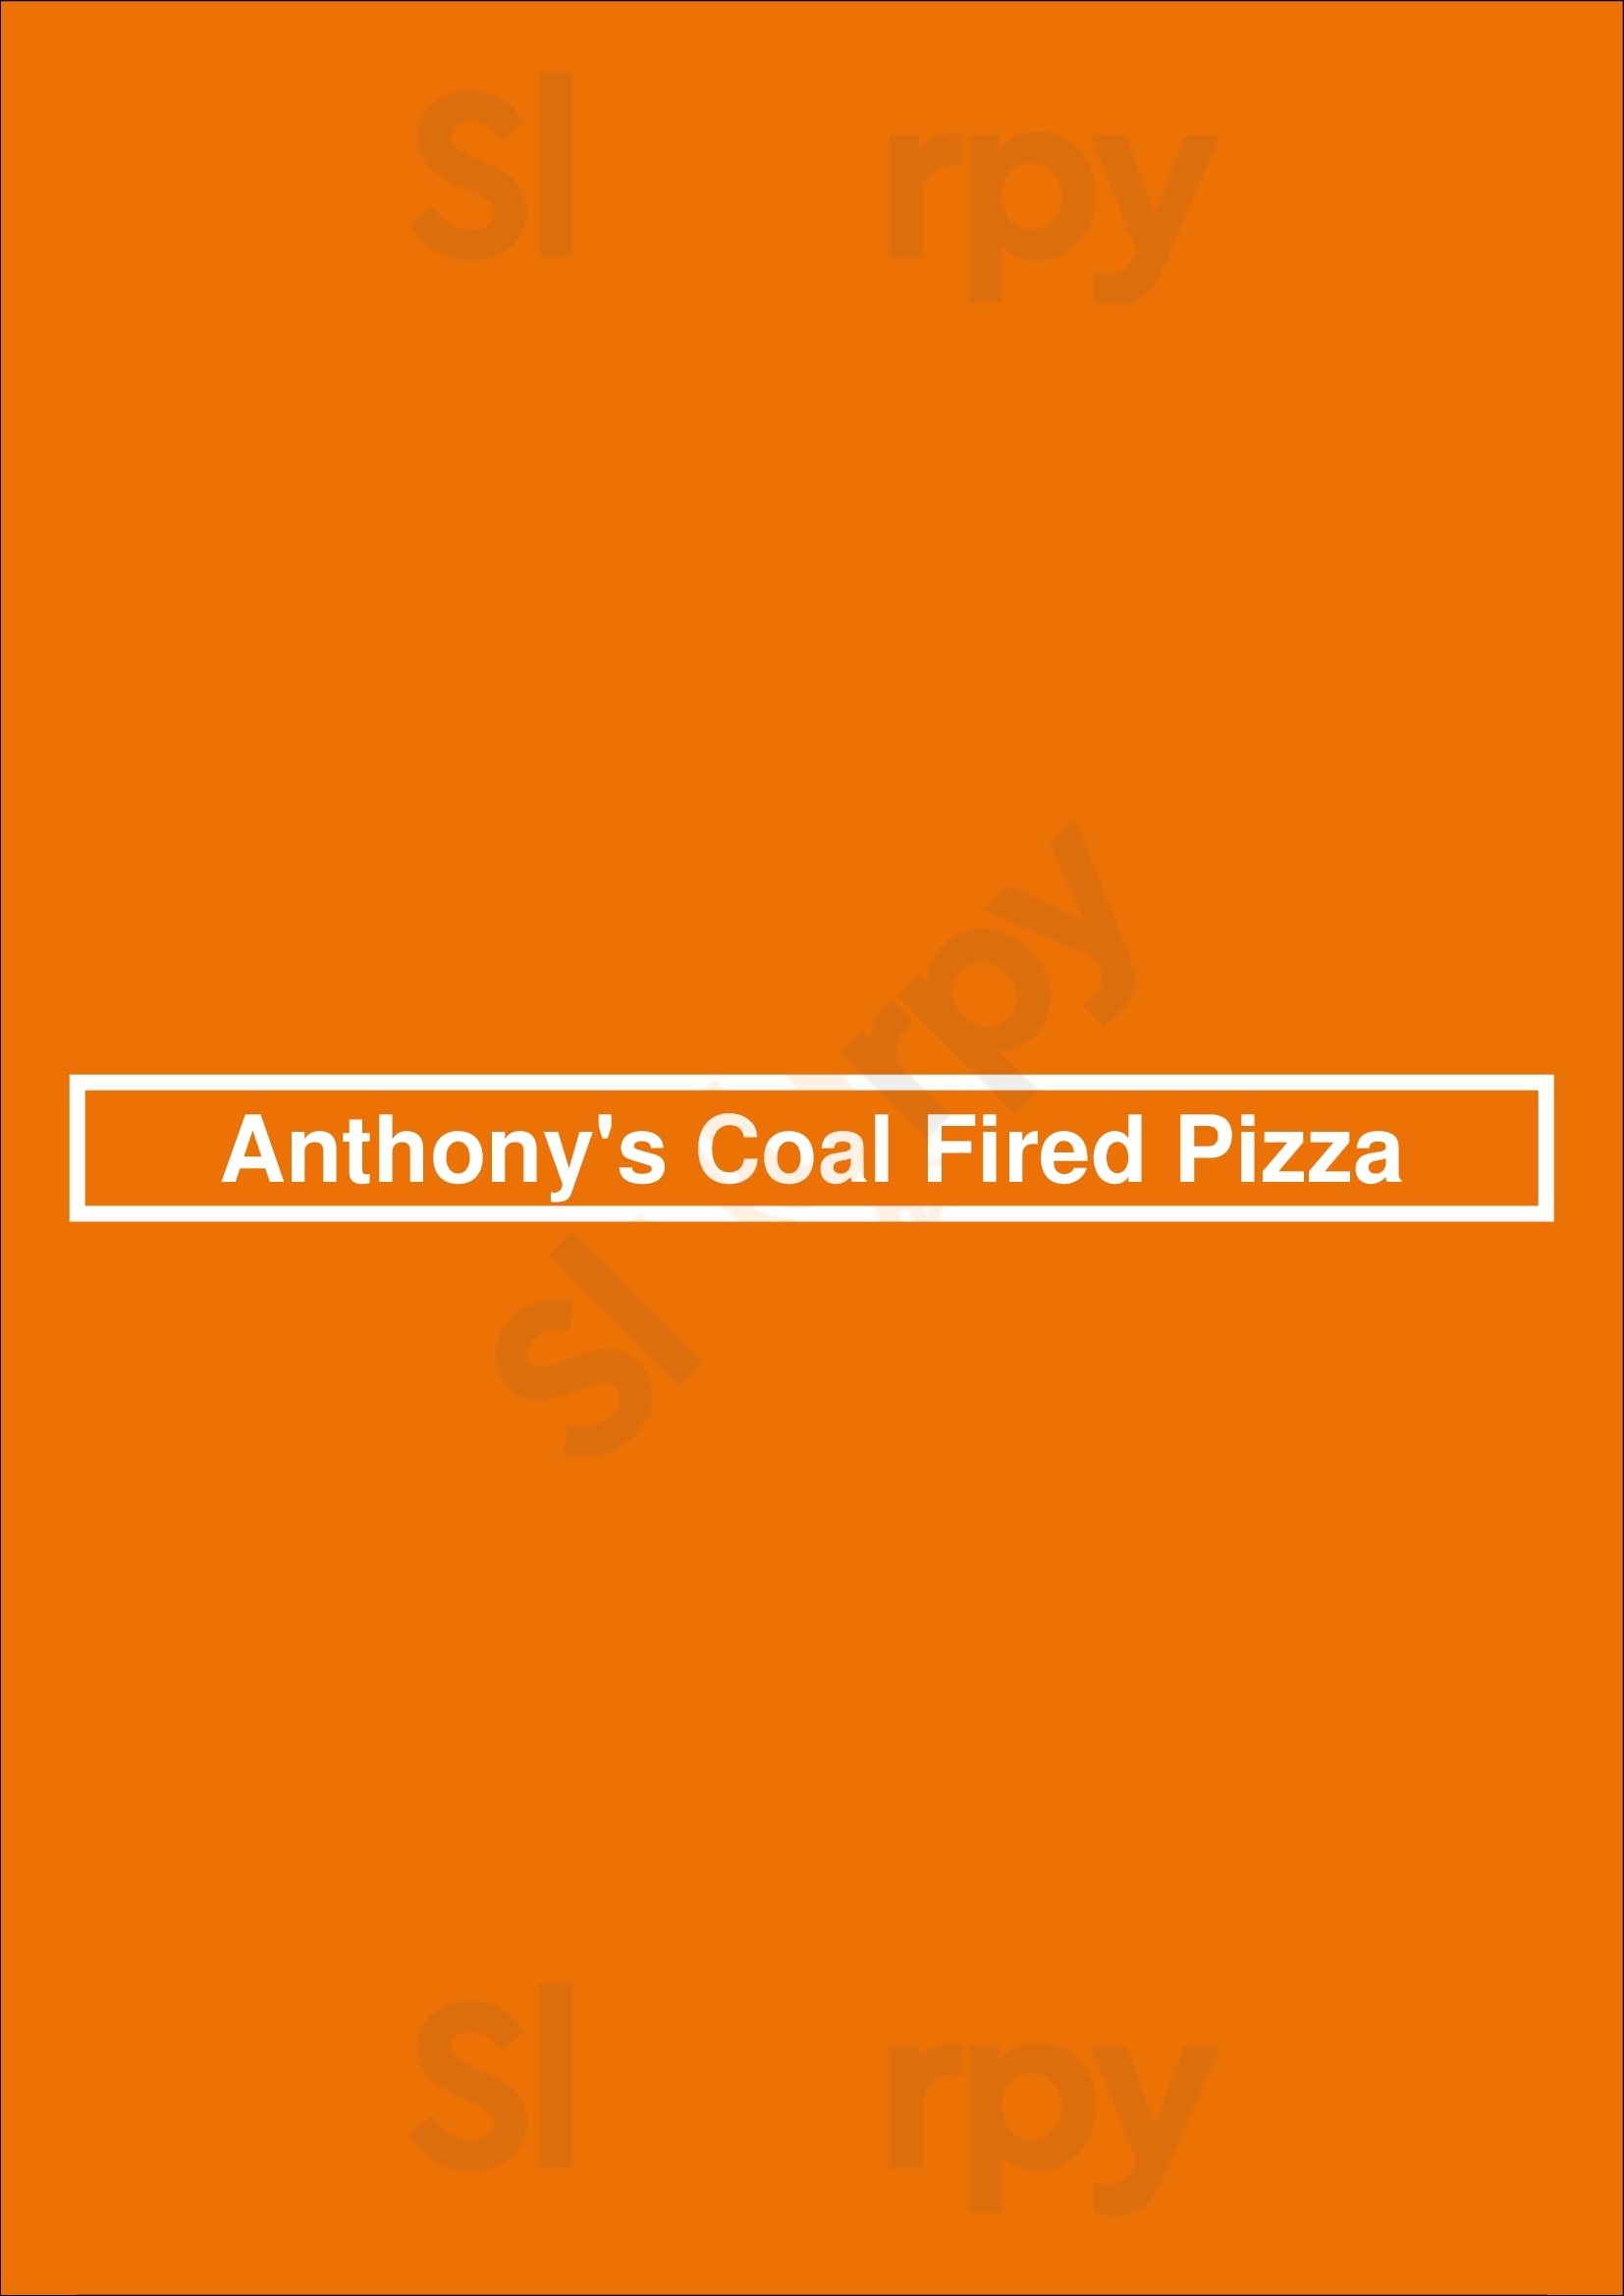 Anthony's Coal Fired Pizza Tampa Menu - 1